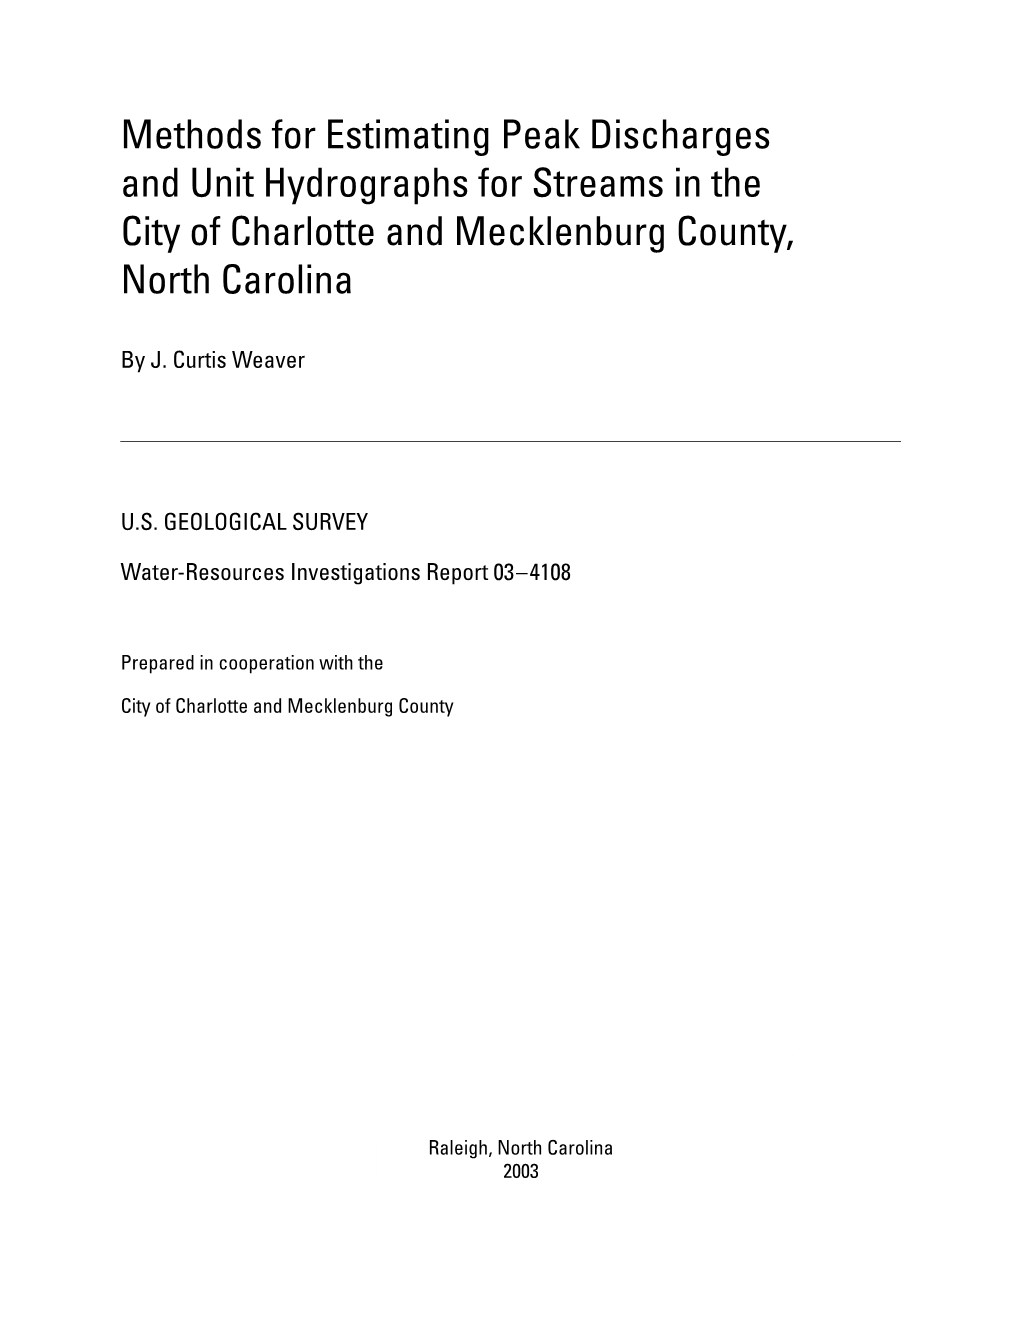 Methods for Estimating Peak Discharges and Unit Hydrographs for Streams in the City of Charlotte and Mecklenburg County, North Carolina